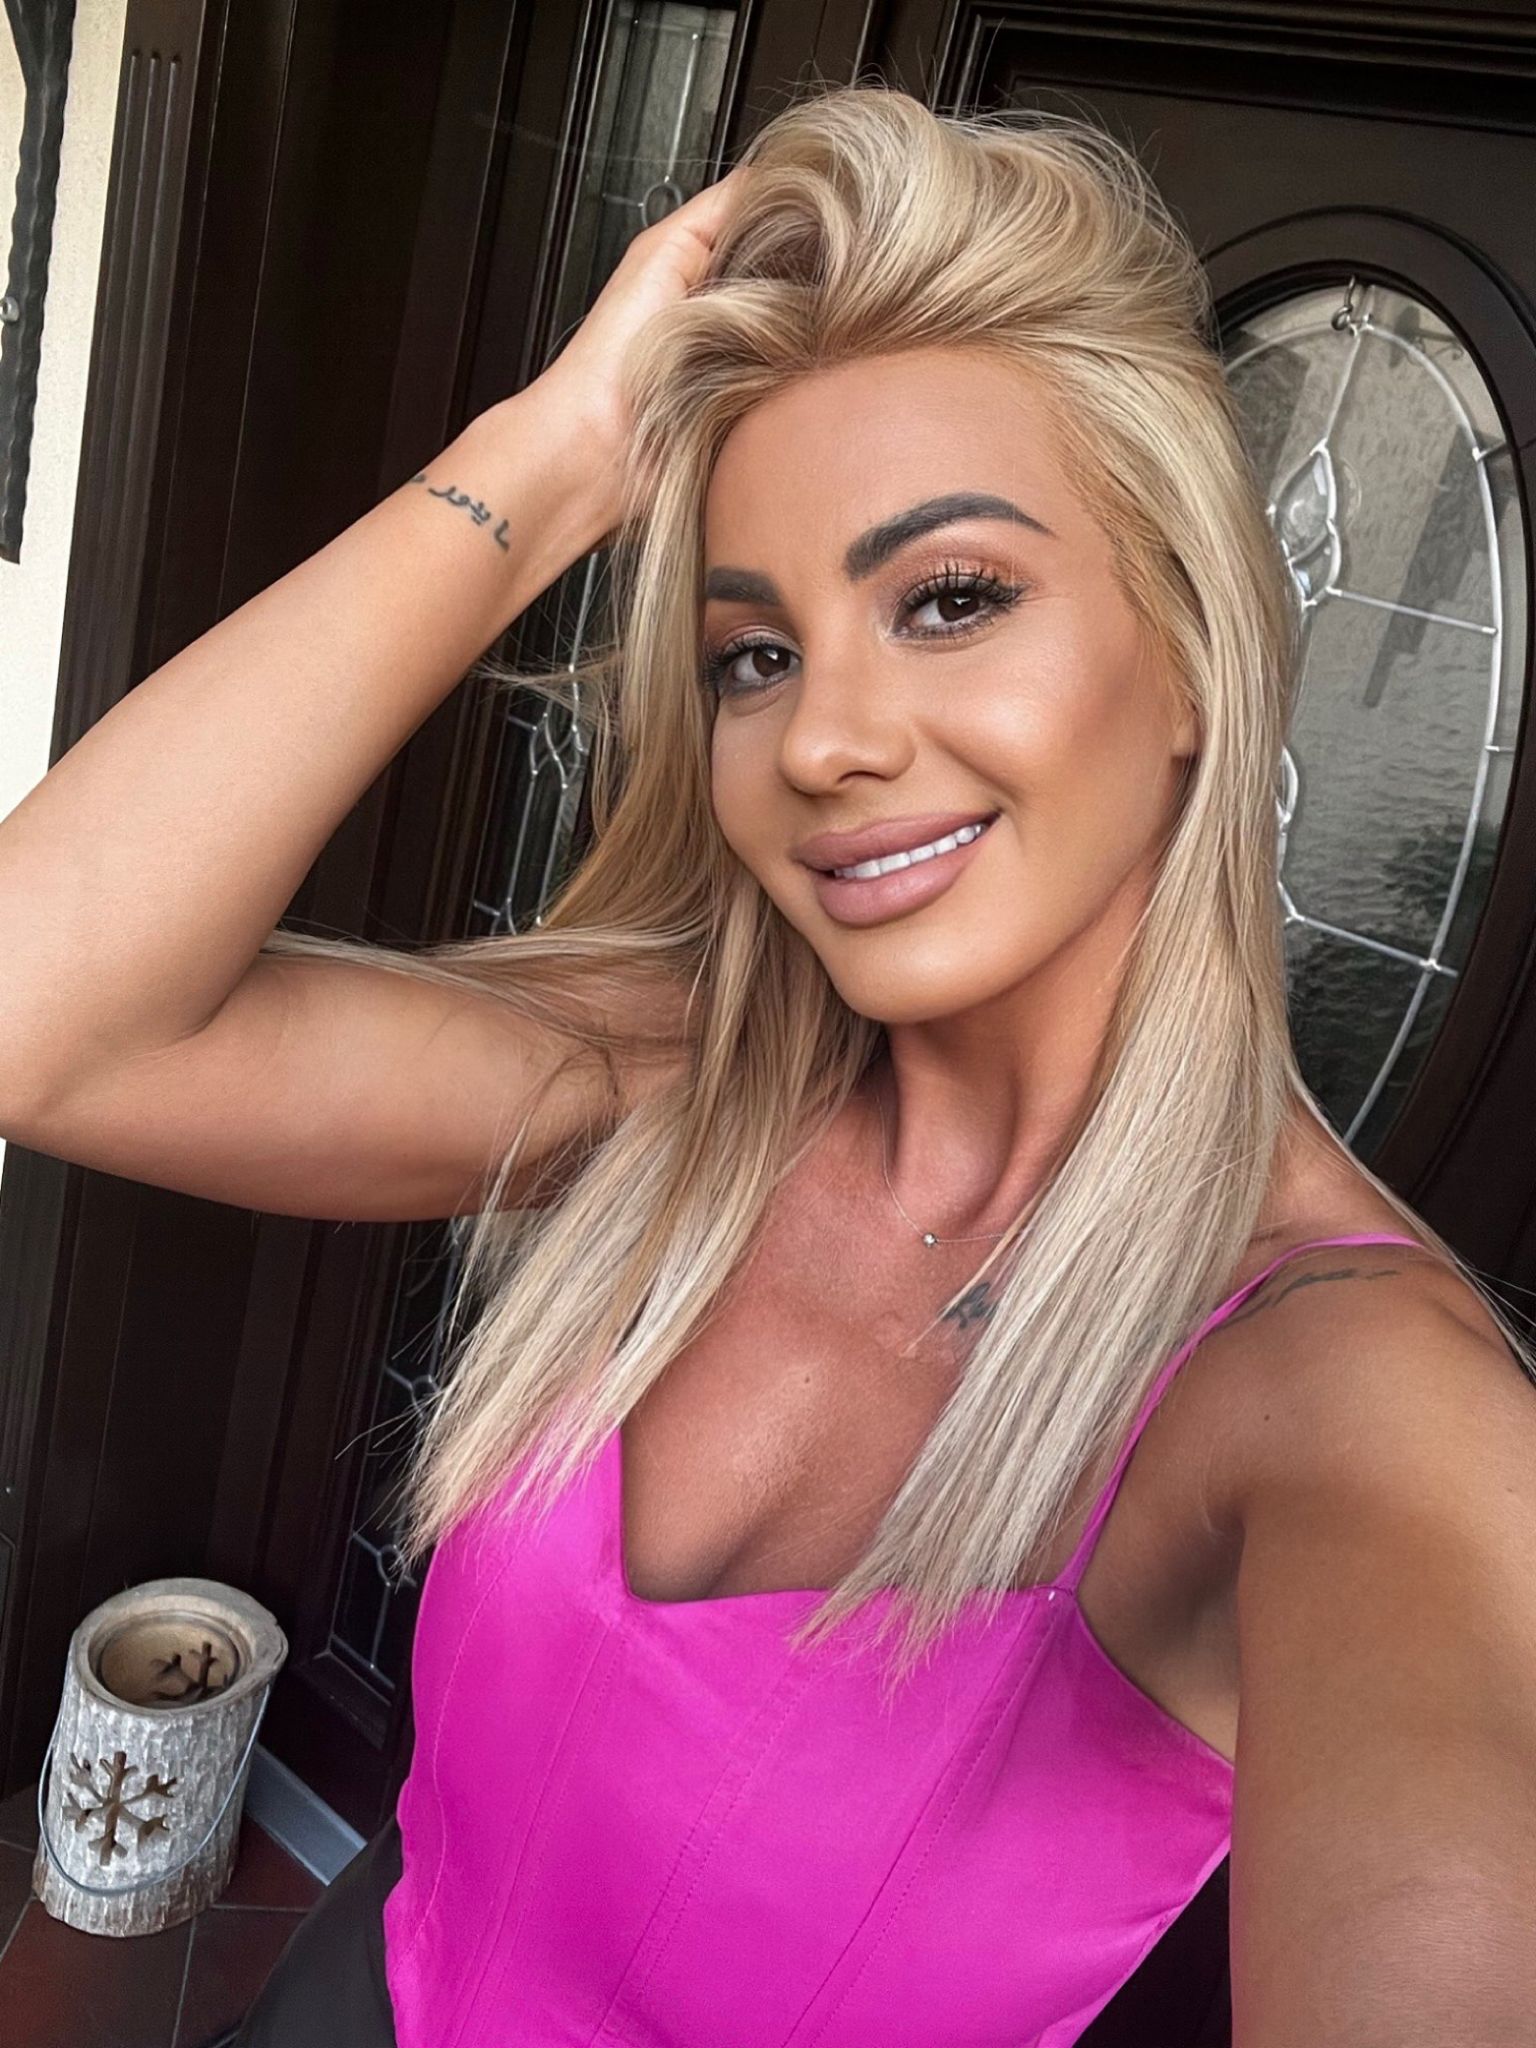 Alice taking a selfie in a pink top 